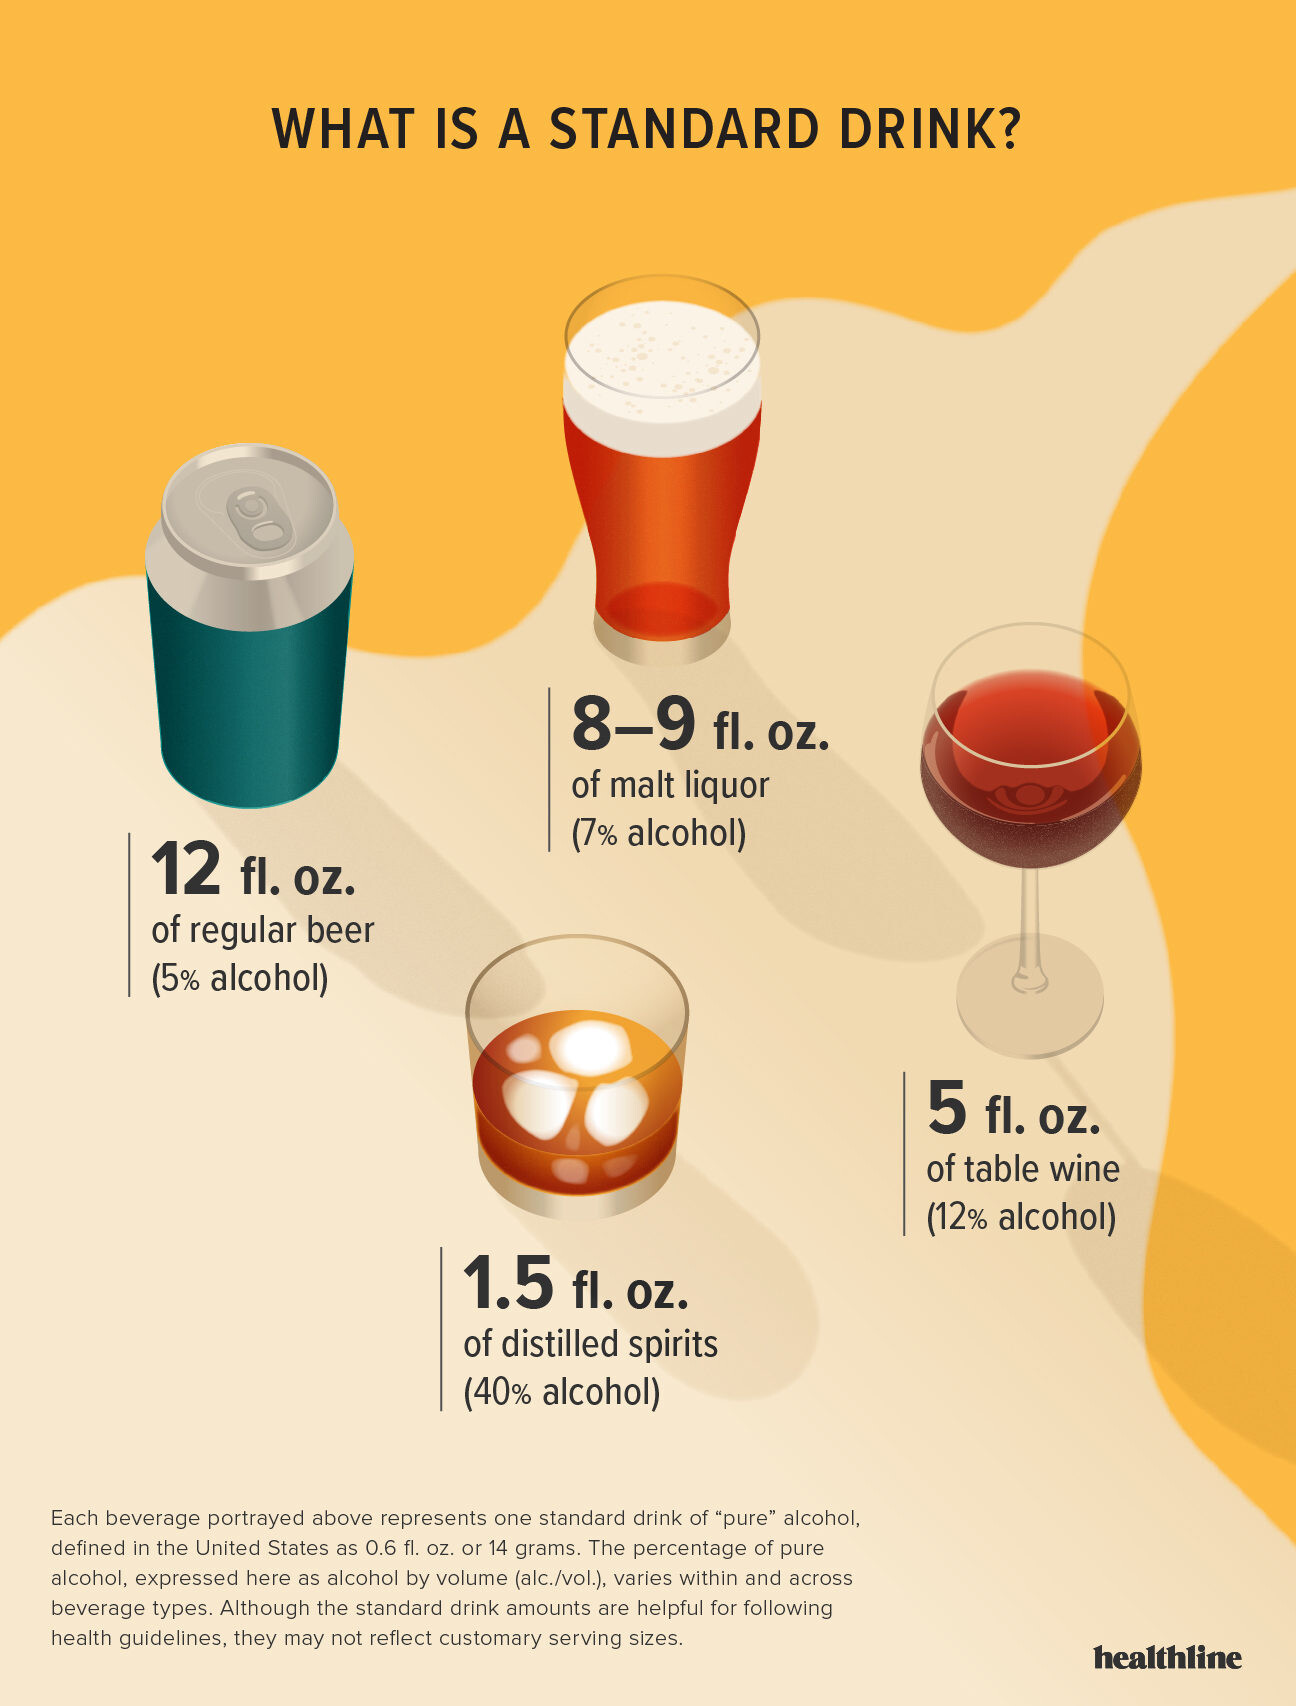  how much percent of alcohol is in a standard drink